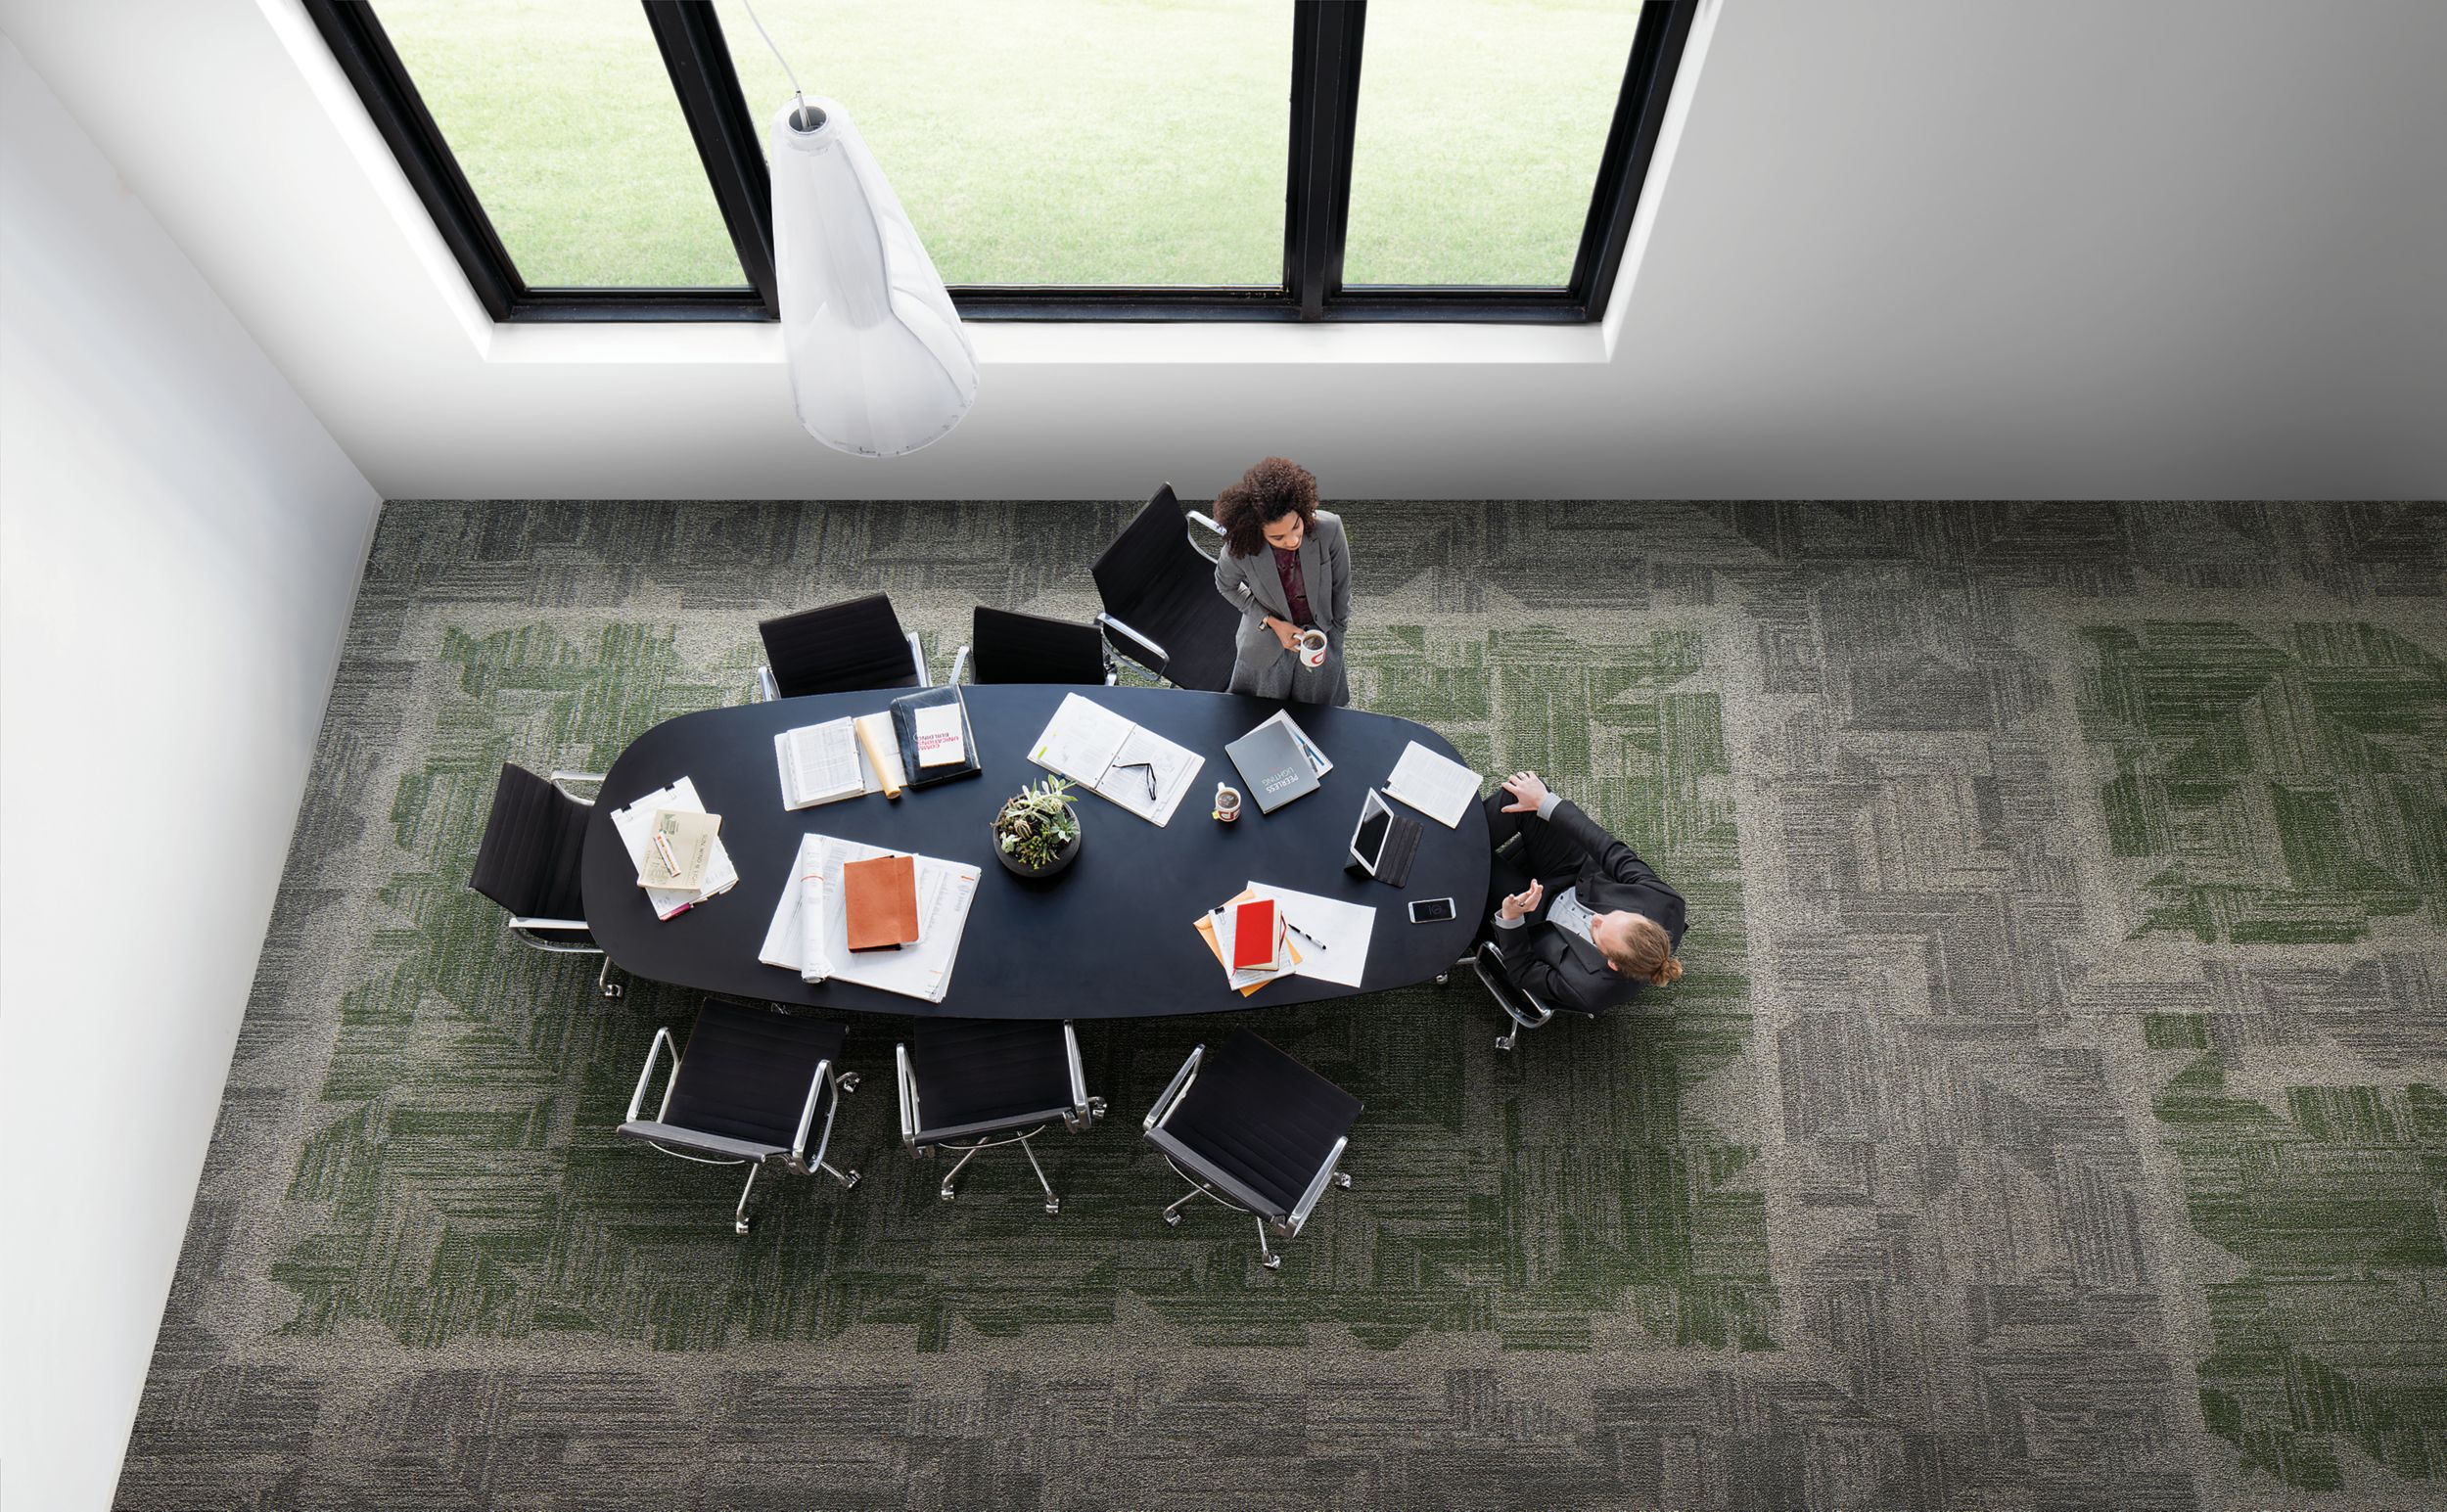 Interface Open Air 403 carpet tile in overhead view of meeting table with man and woman talking numéro d’image 1